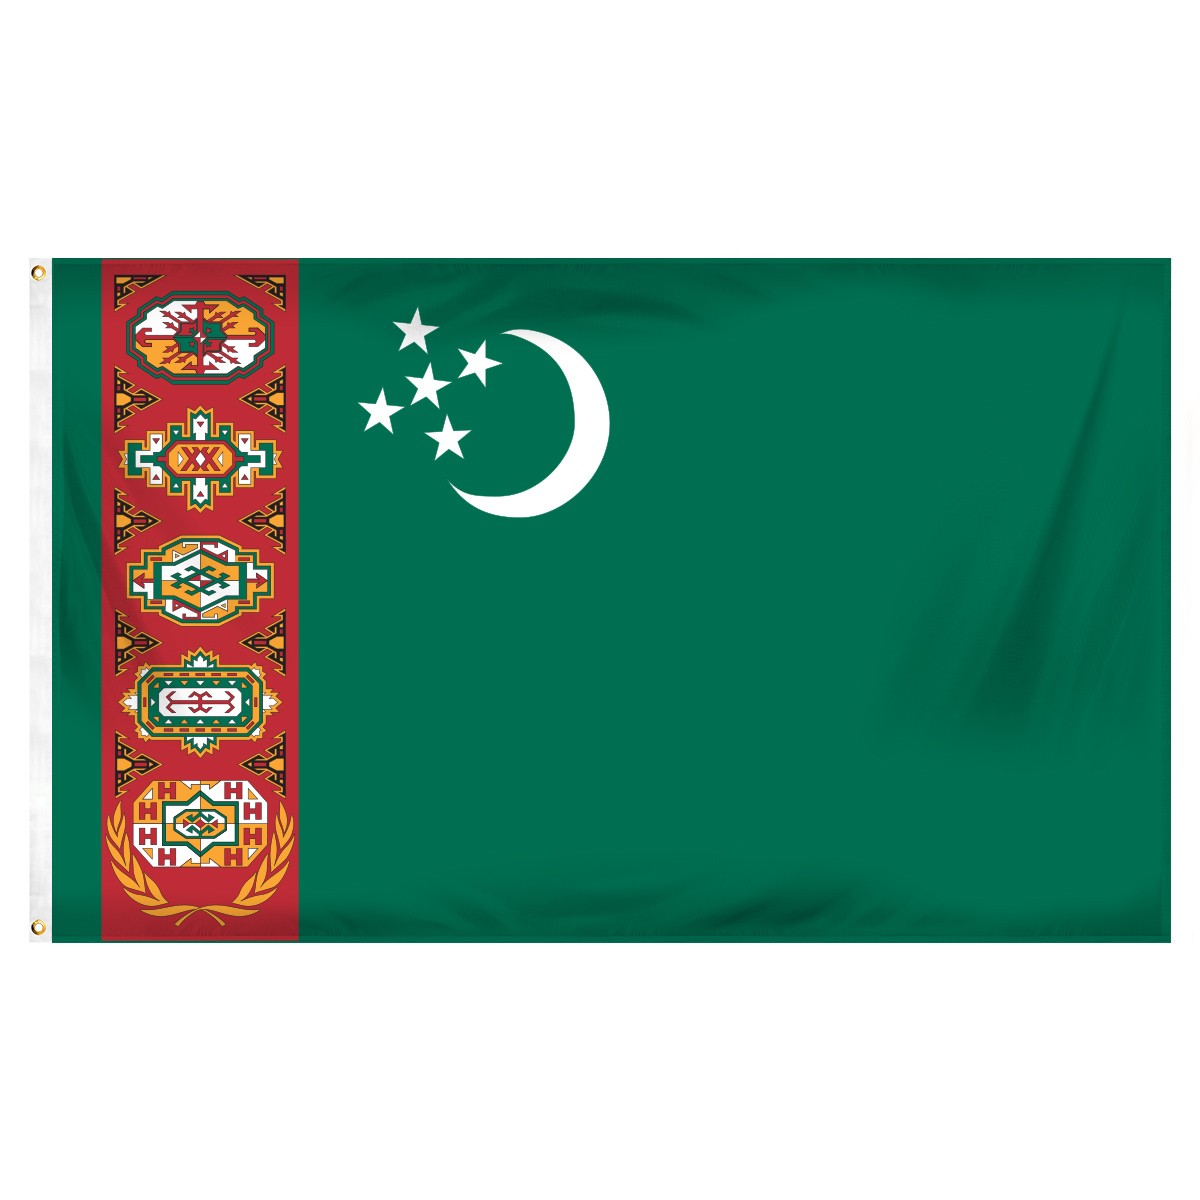 Turkmenistan Posters and Banners